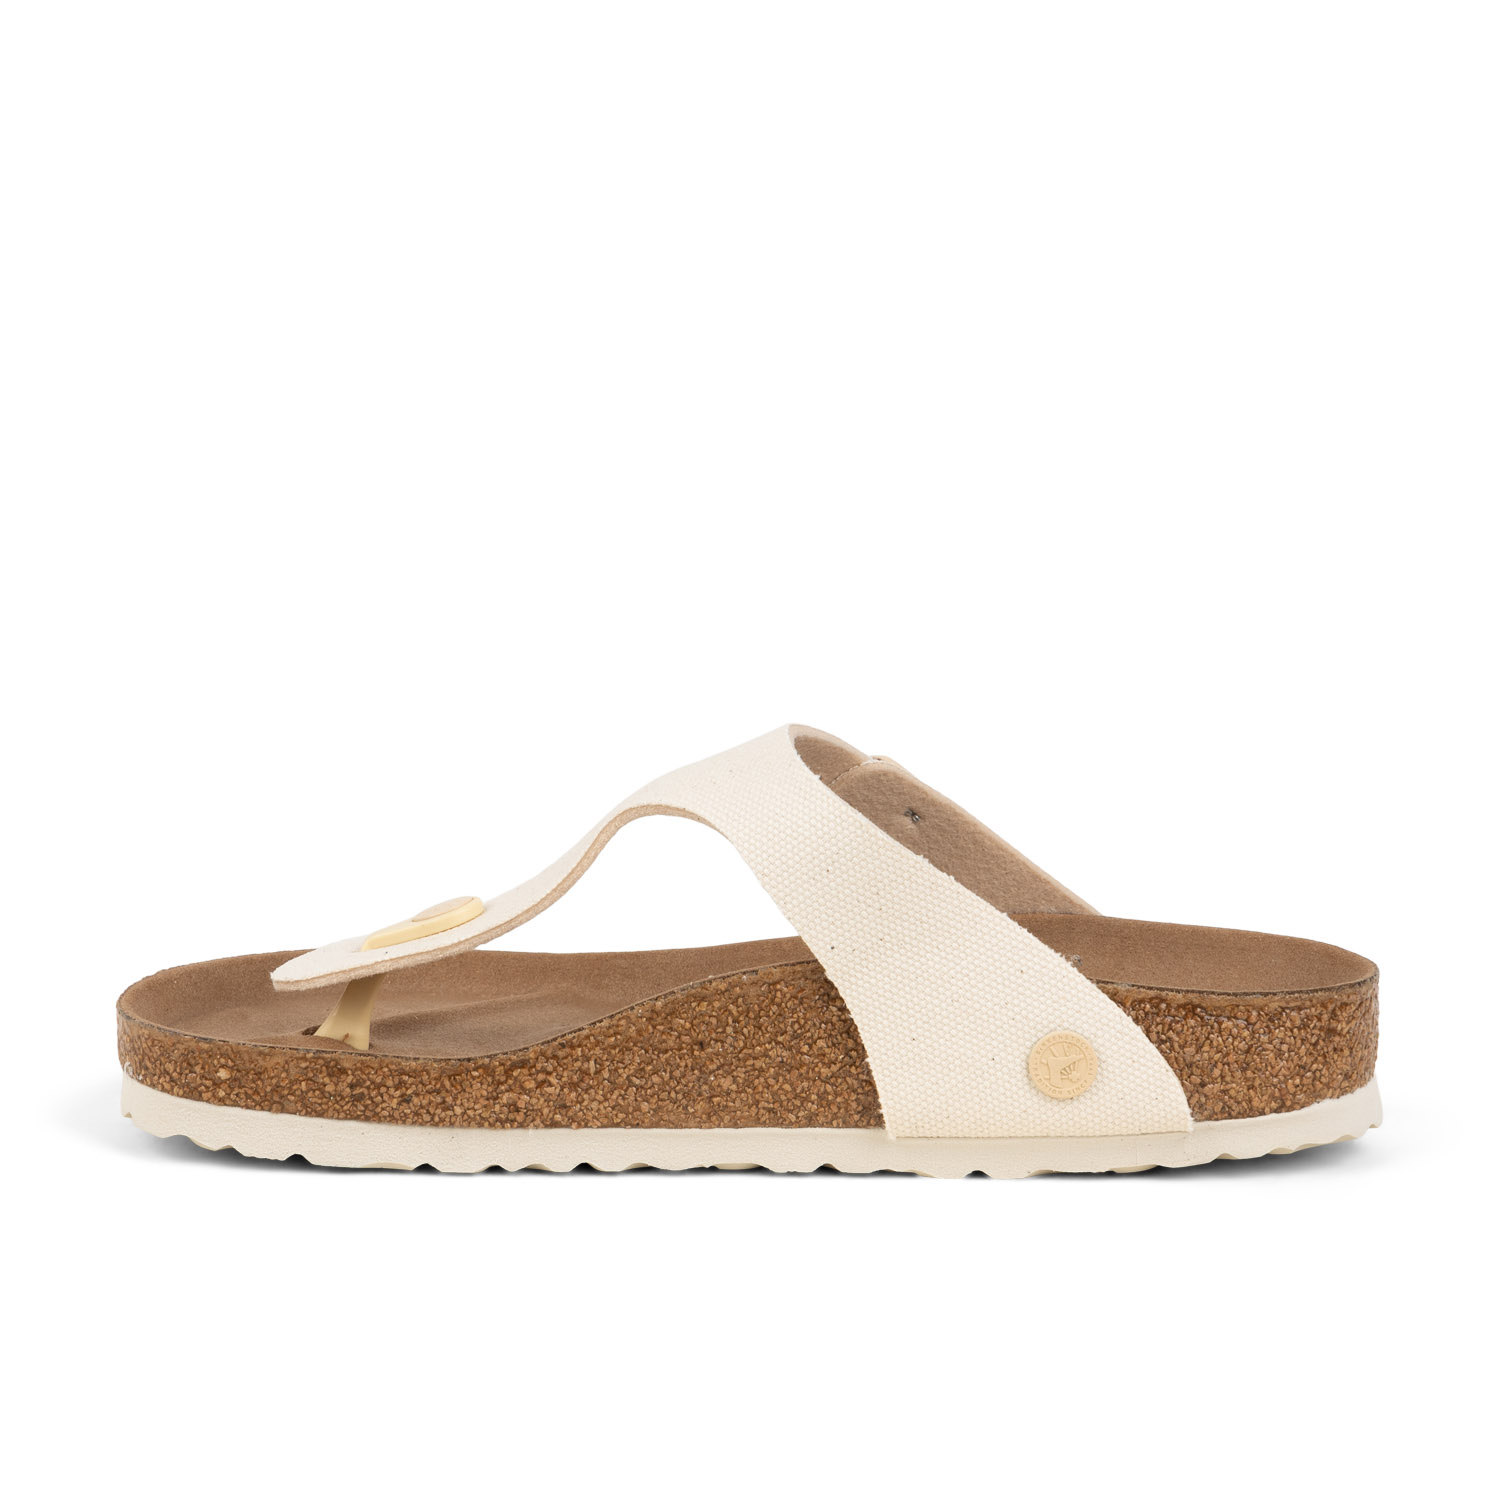 04 - GIZEH TEX - BIRKENSTOCK - Sandales - Cuir / synthétique